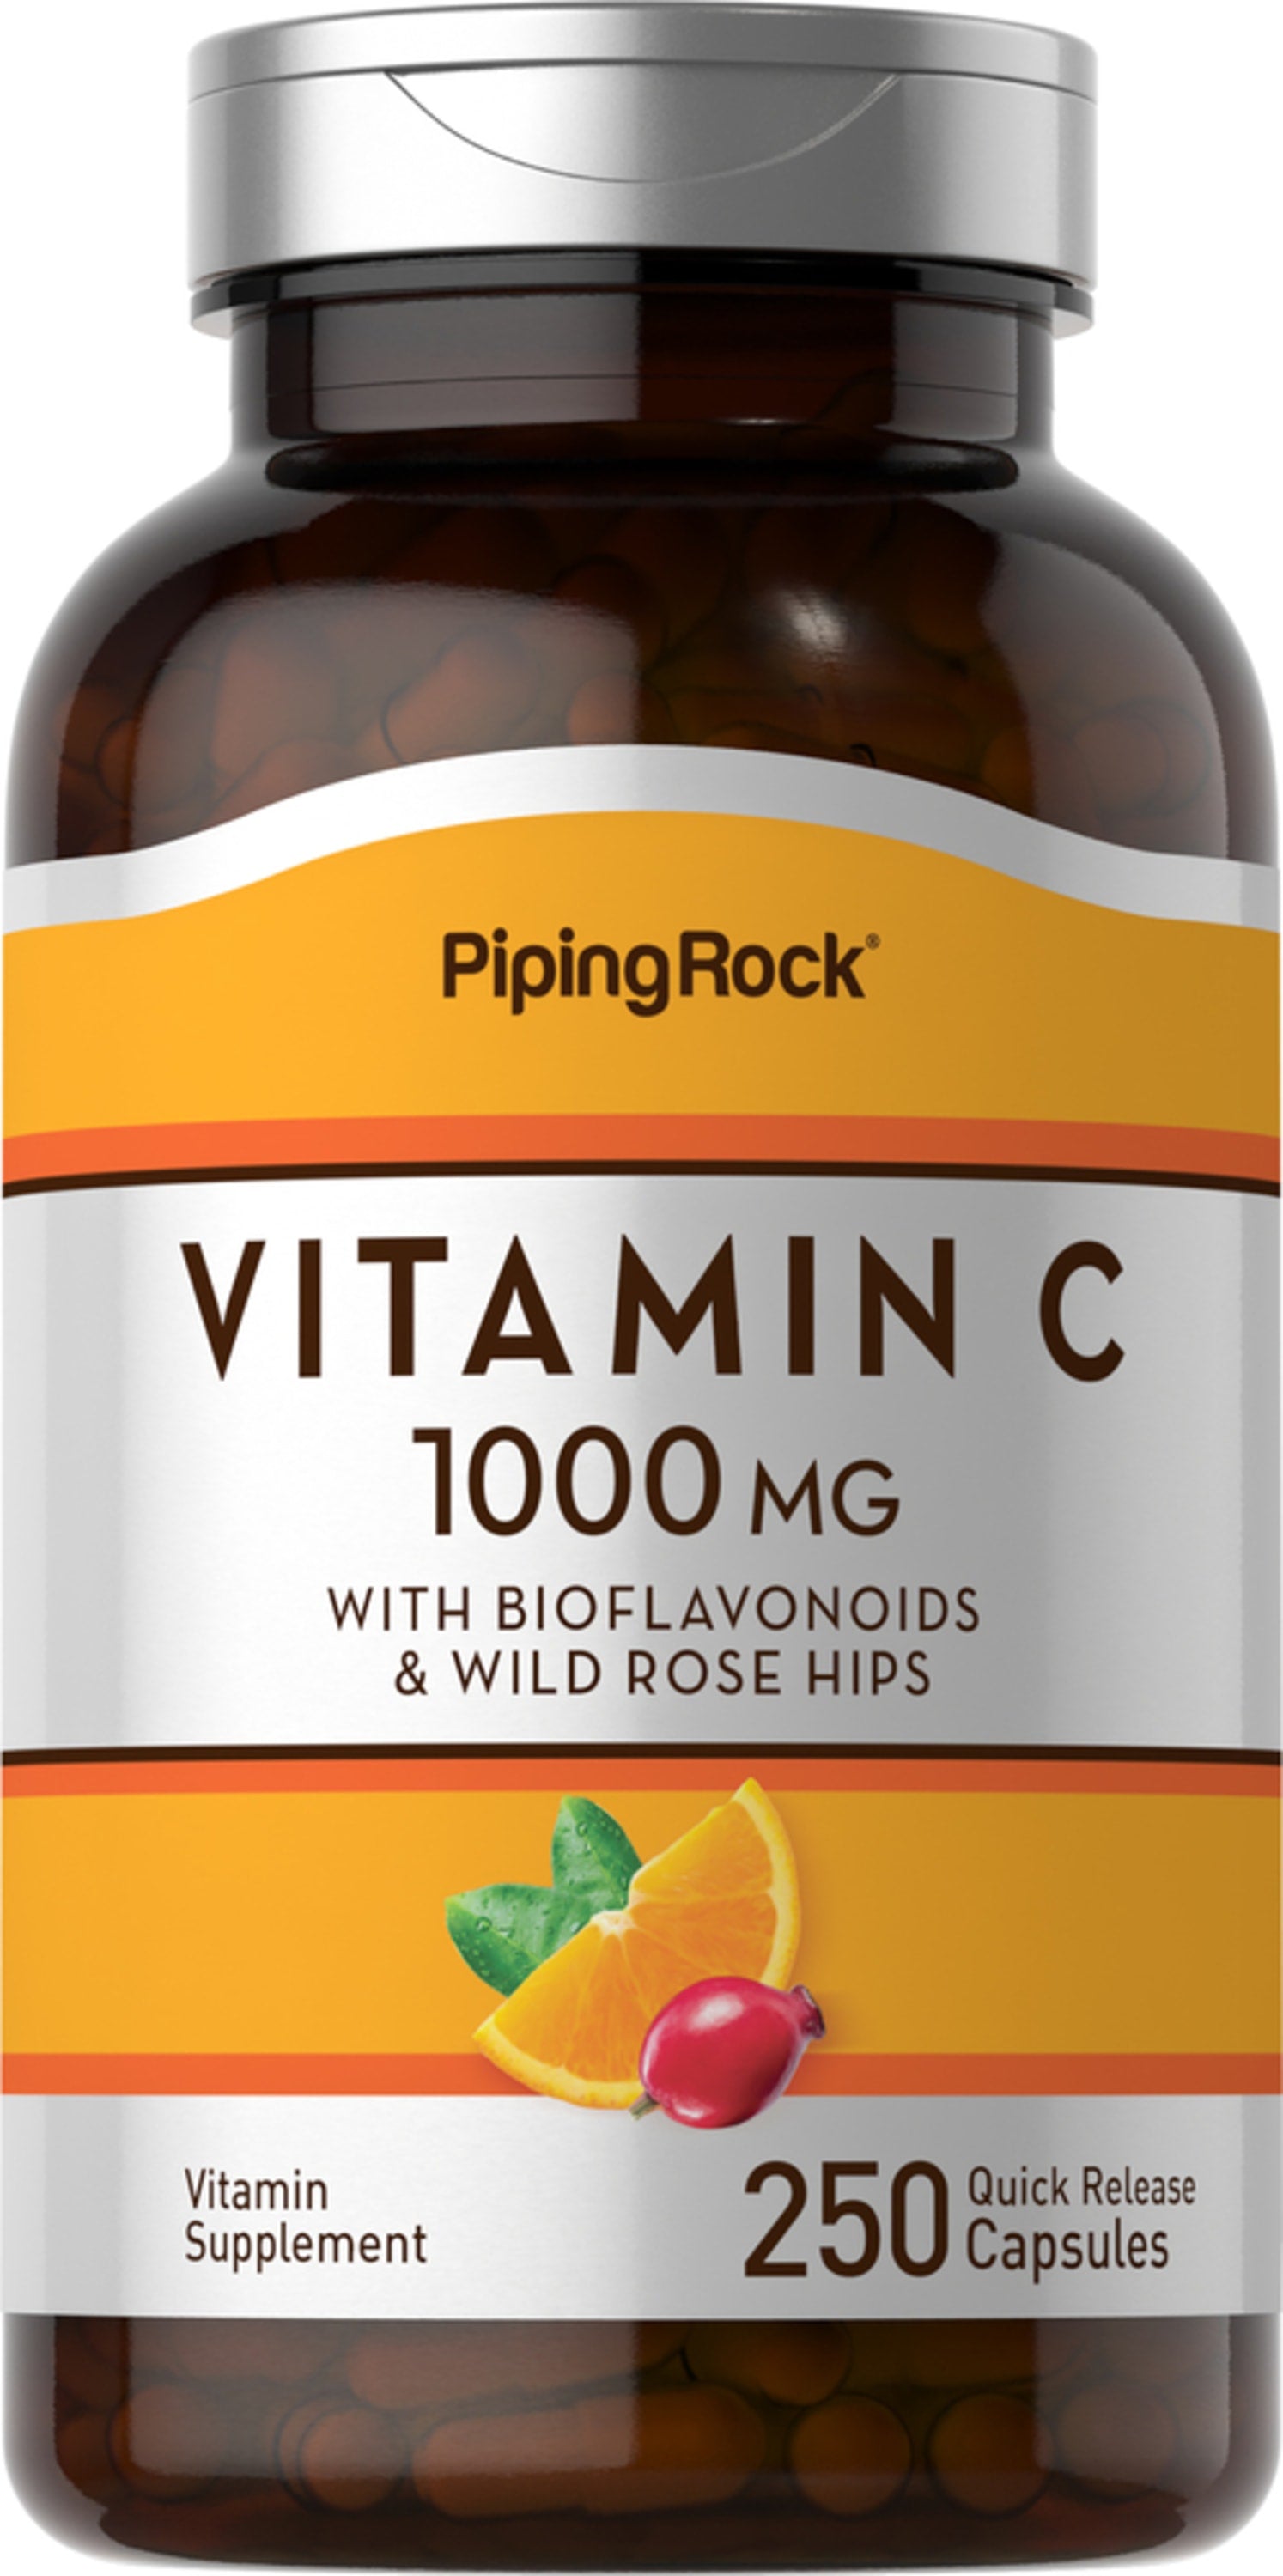 Vitamin C 1000 mg with Bioflavonoids & Rose Hips, 250 Quick Release Capsules